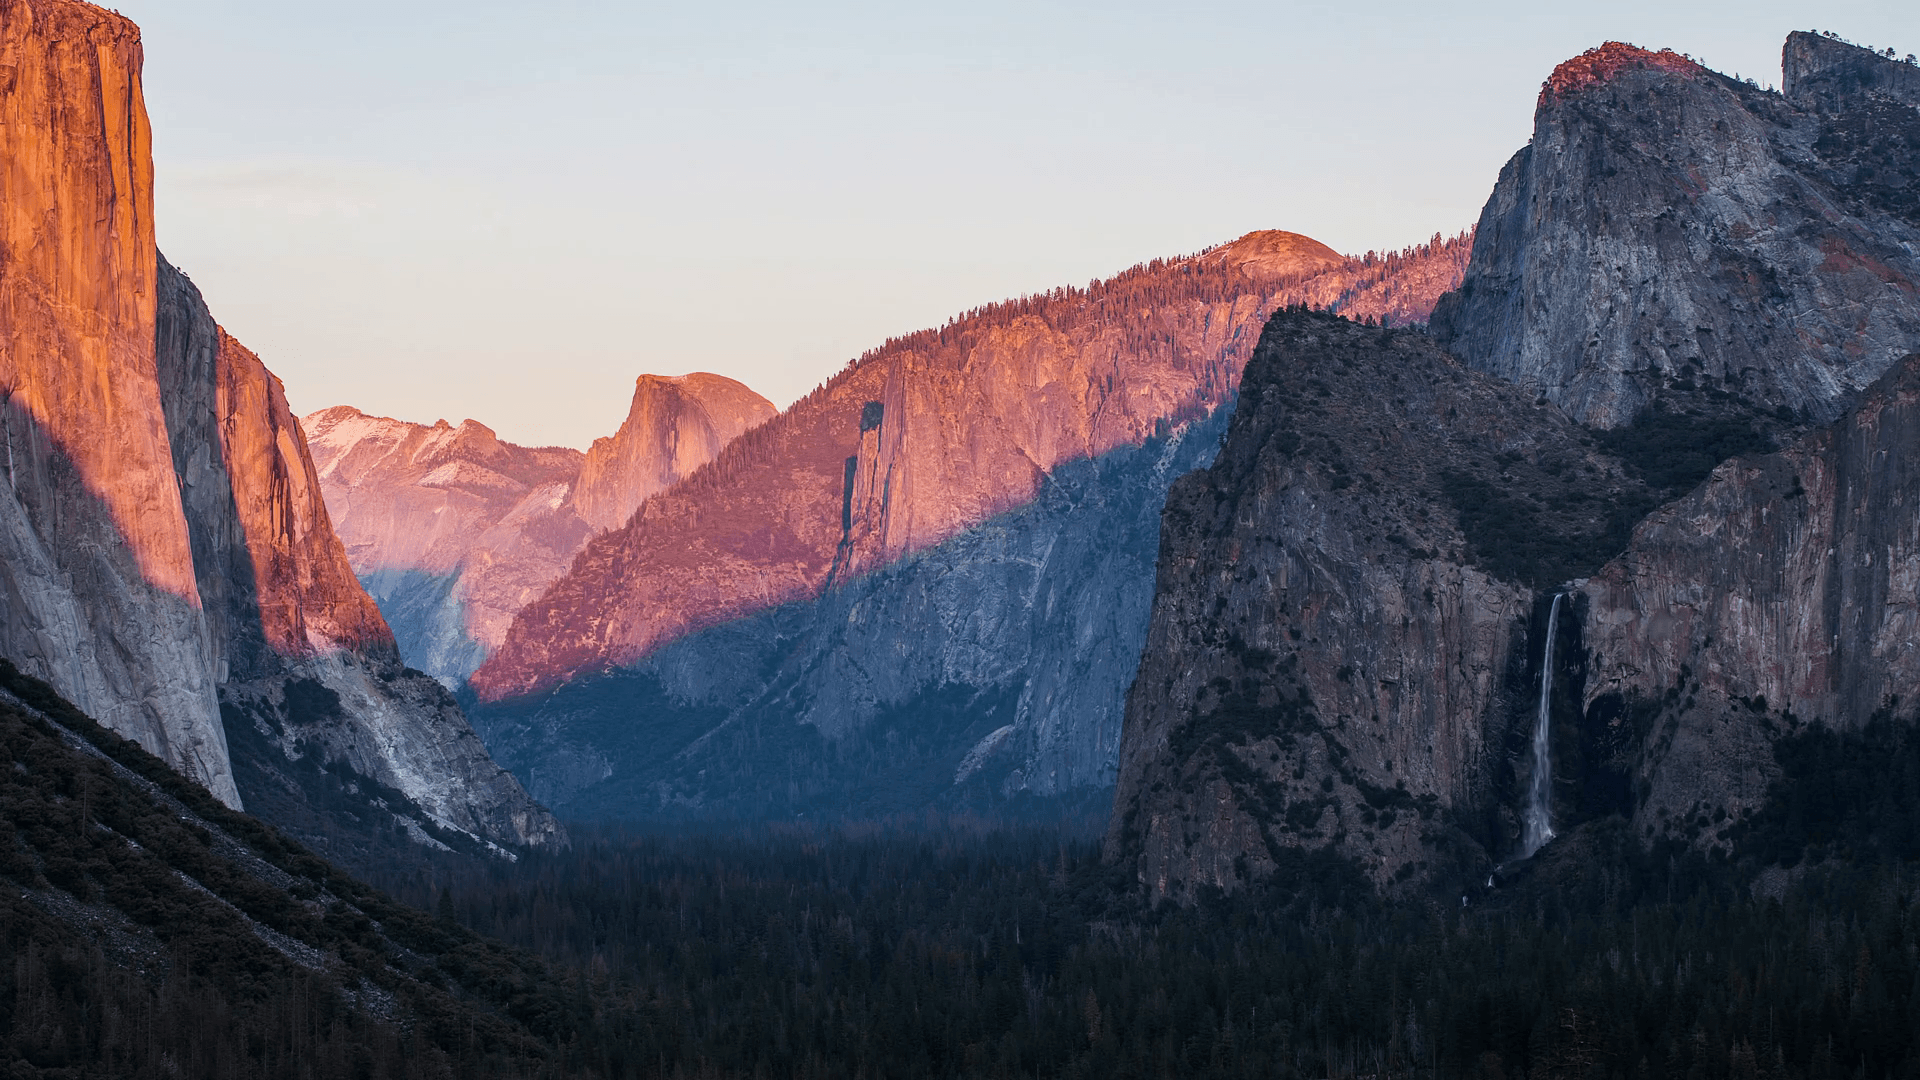 Time lapse of the sun setting over Yosemite Valley with Half Dome in the background. Stock Video Footage